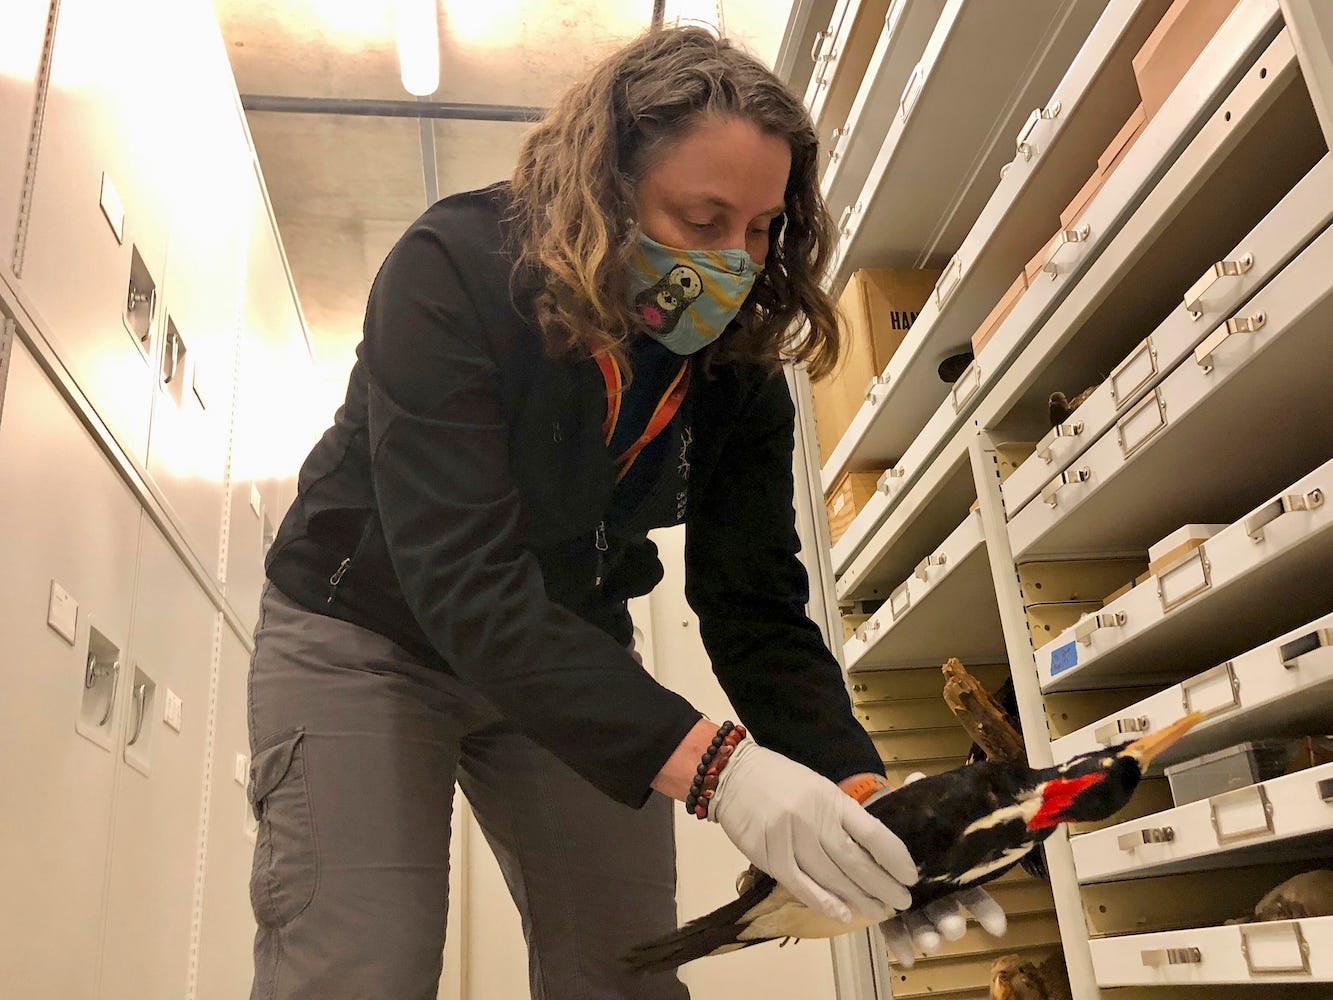 Moe Flannery, senior collections manager for ornithology and mammalogy at the California Academy of Sciences, holds an ivory-billed woodpecker, one of the species in their specimen collection, in San Francisco, Friday, Sept. 24, 2021.